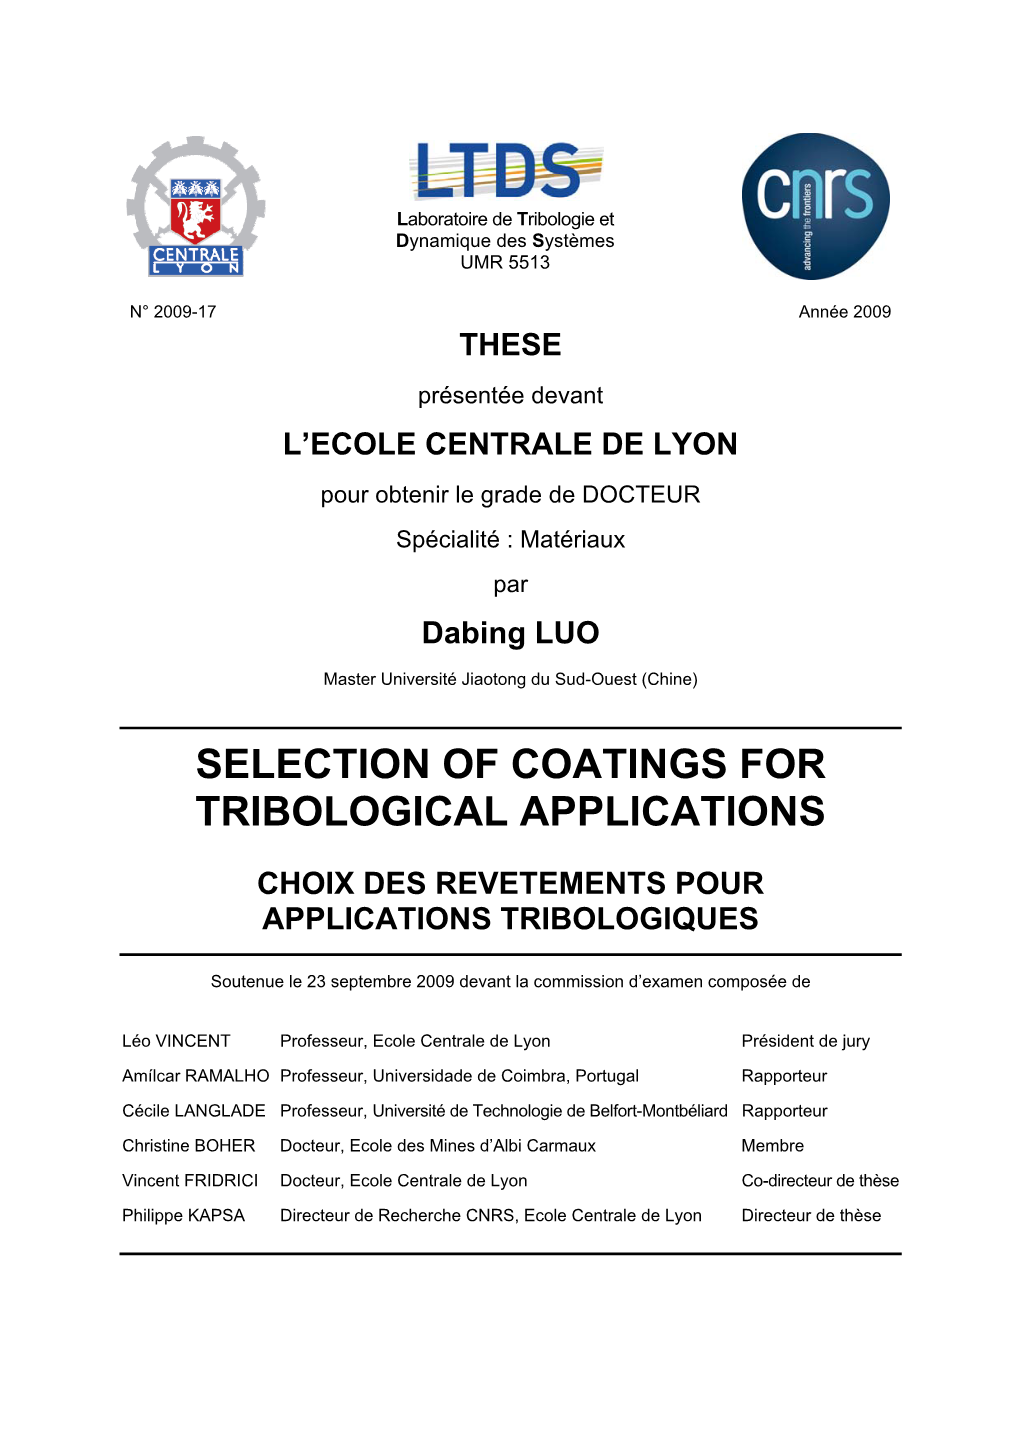 Selection of Coatings for Tribological Applications